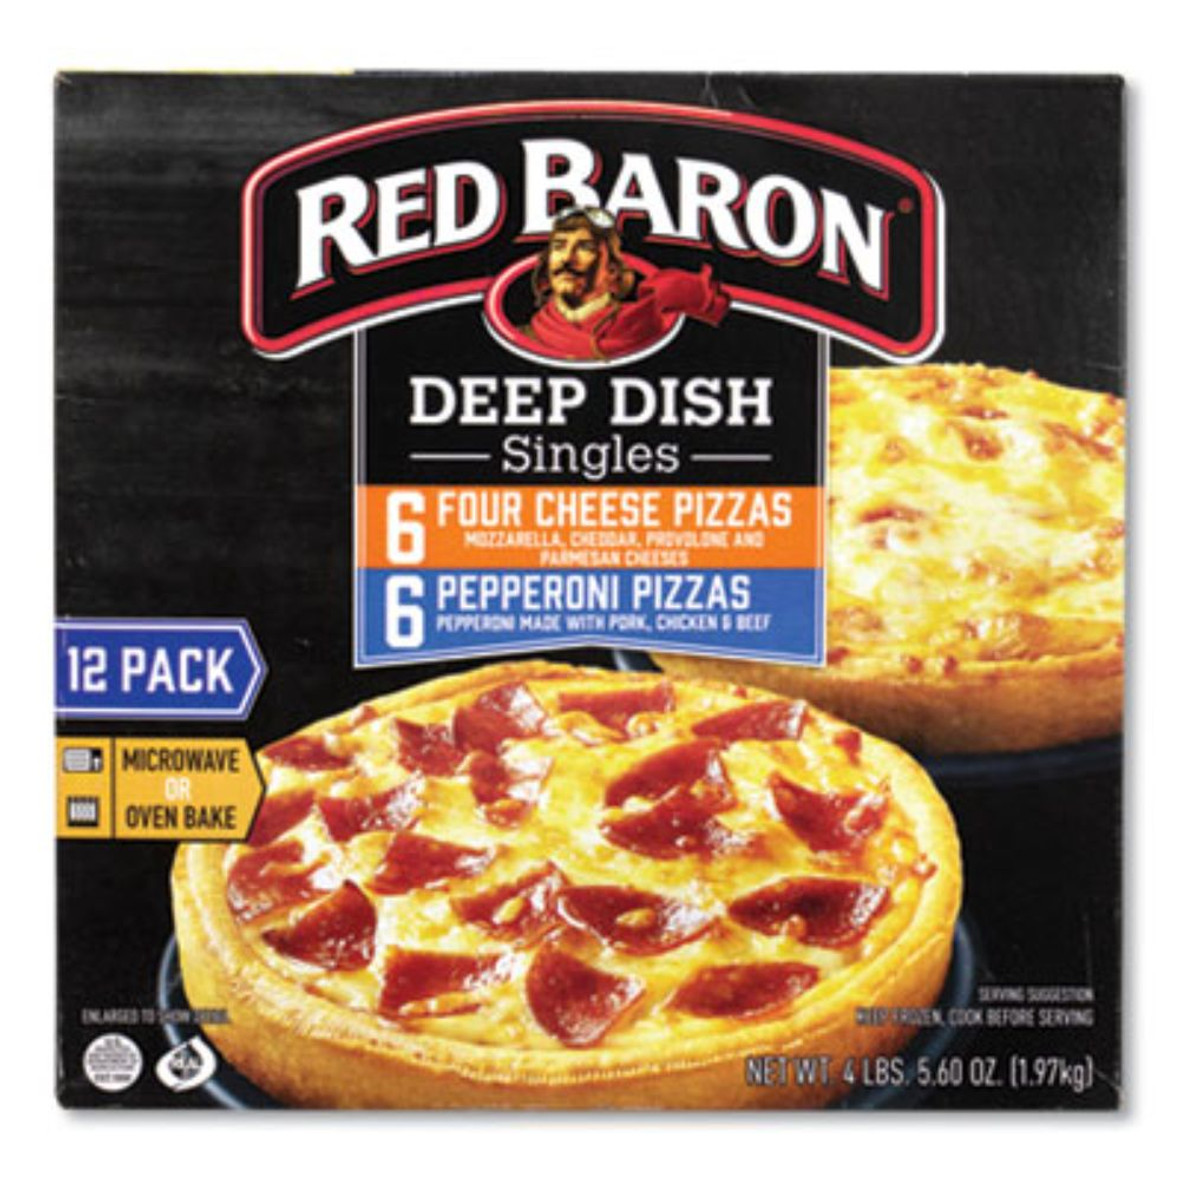 Red Baron Deep Dish Pizza Singles Variety Pack, Four Cheese/Pepperoni